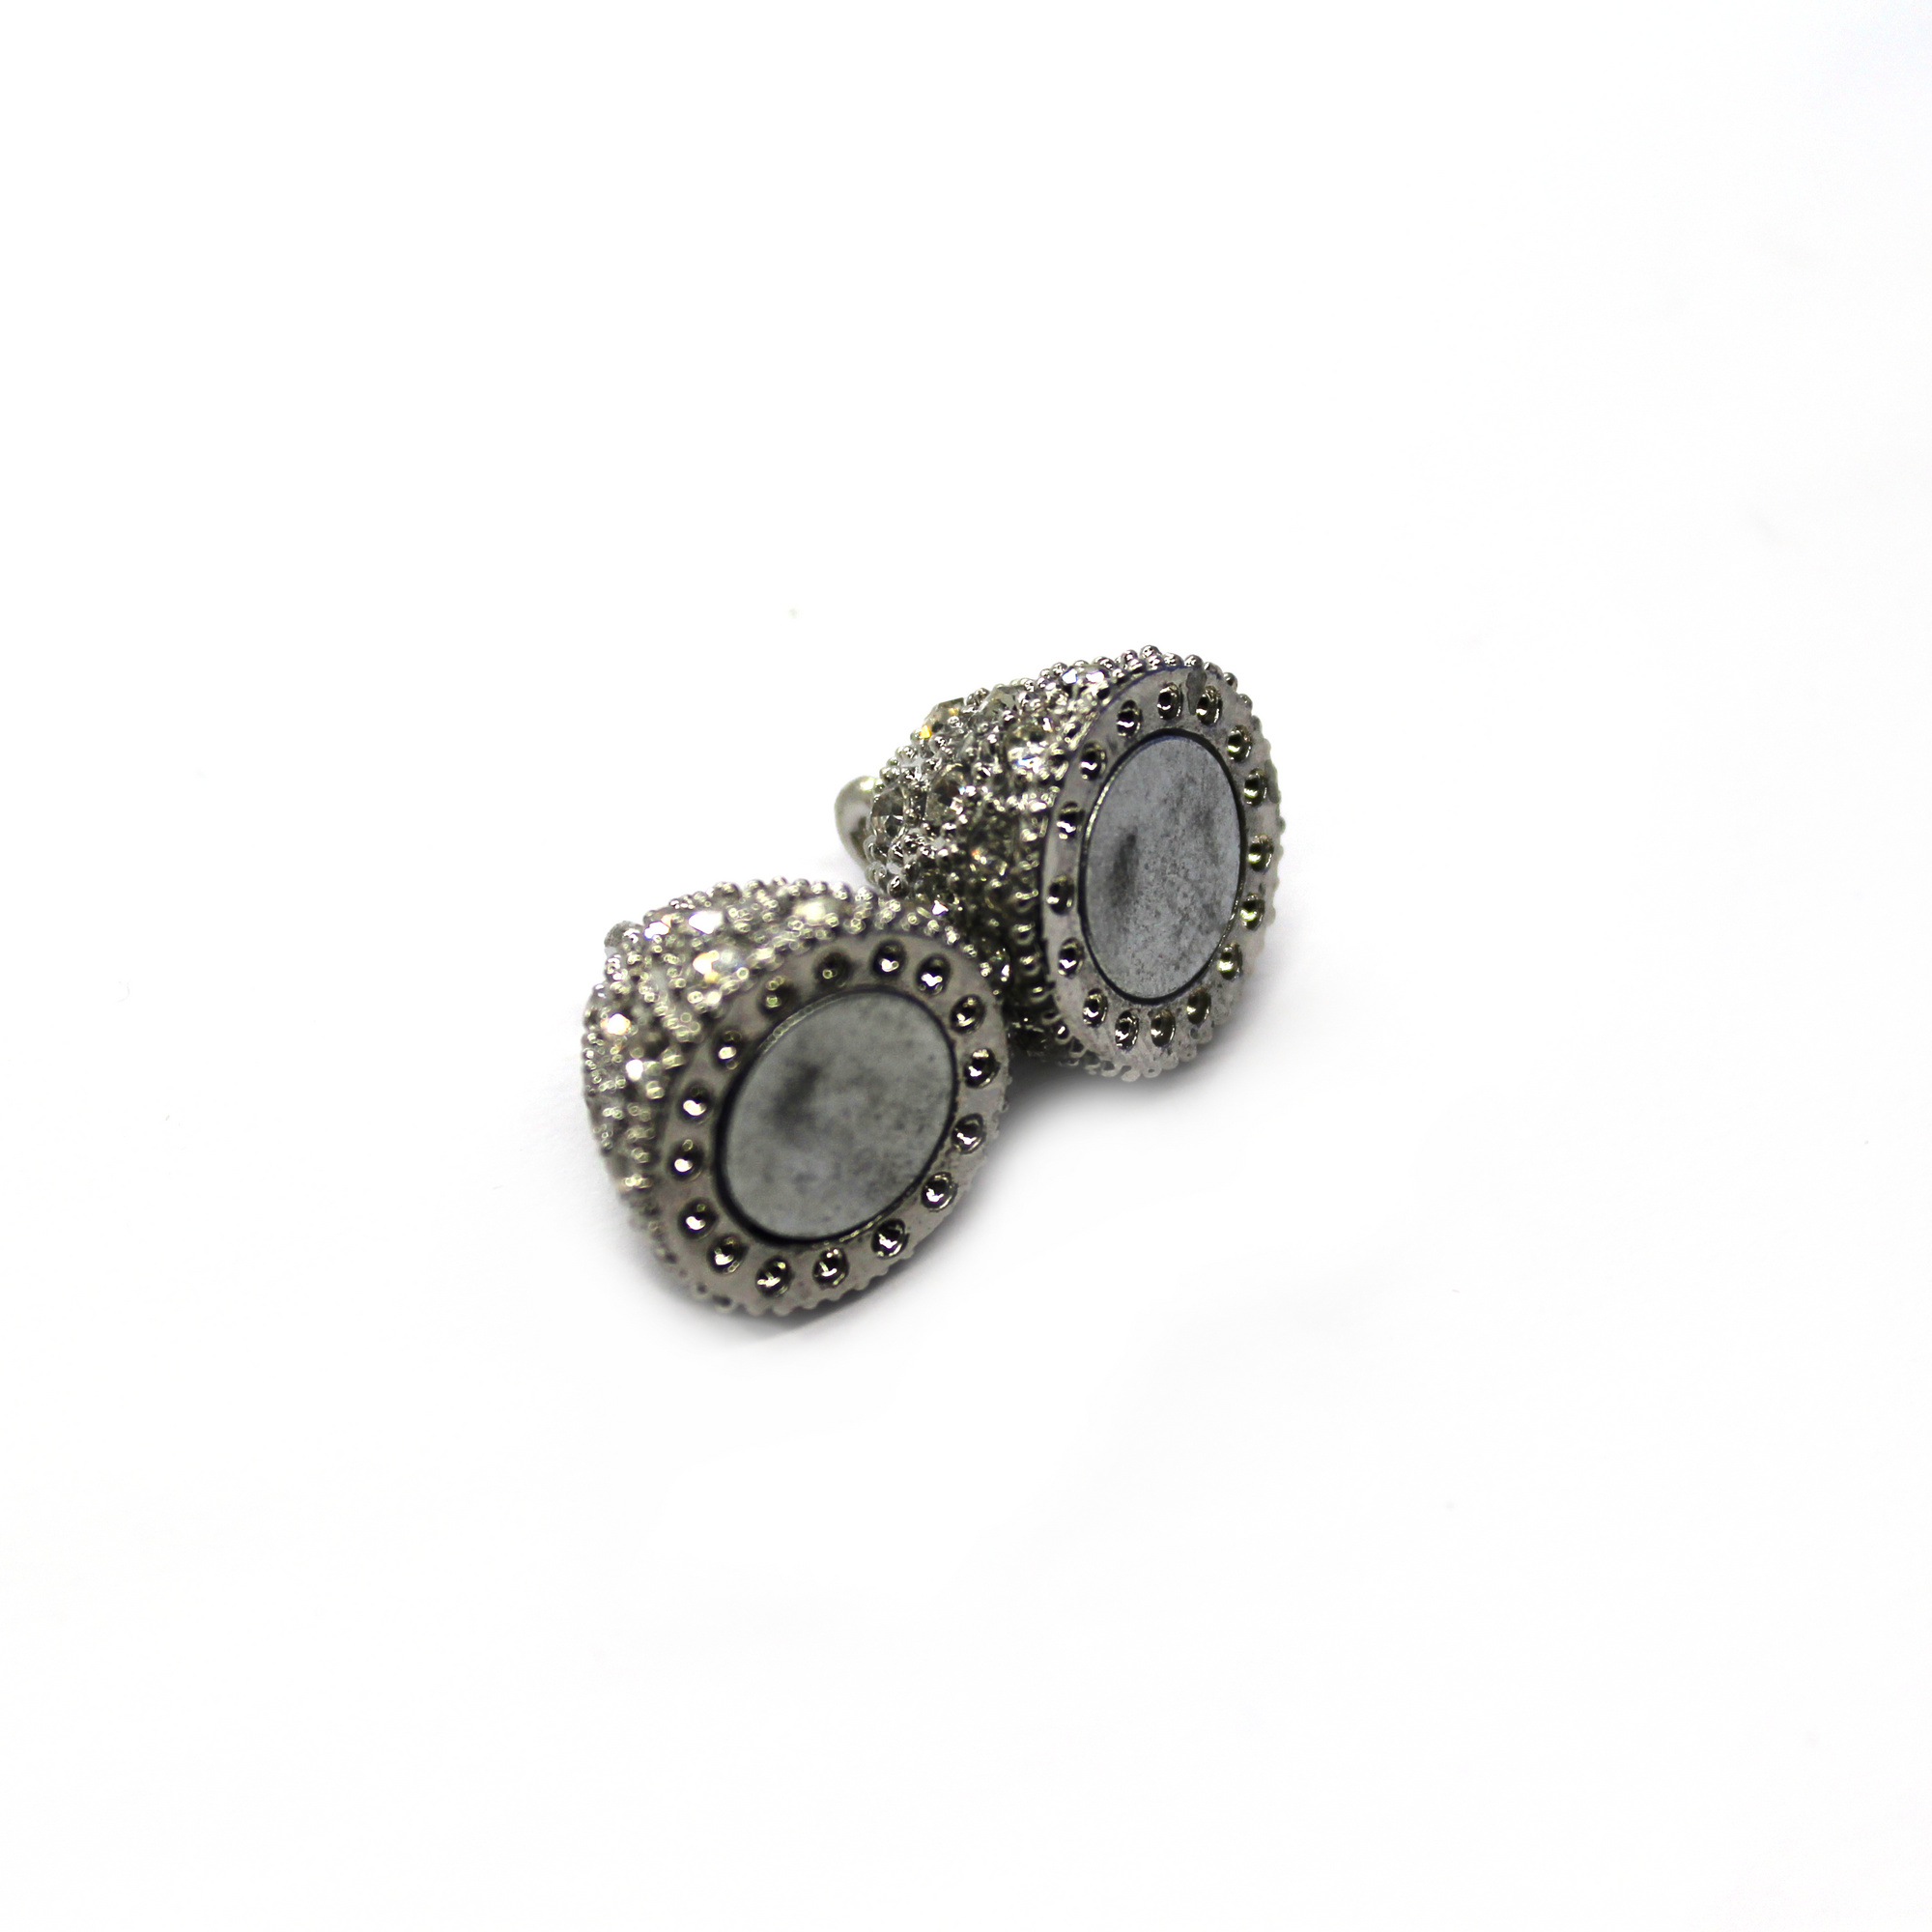 Clasp, Large Magnetic Rhinestone Egg Clasp, Silver, Alloy, 31mm x 17mm, Sold Per pkg of 1